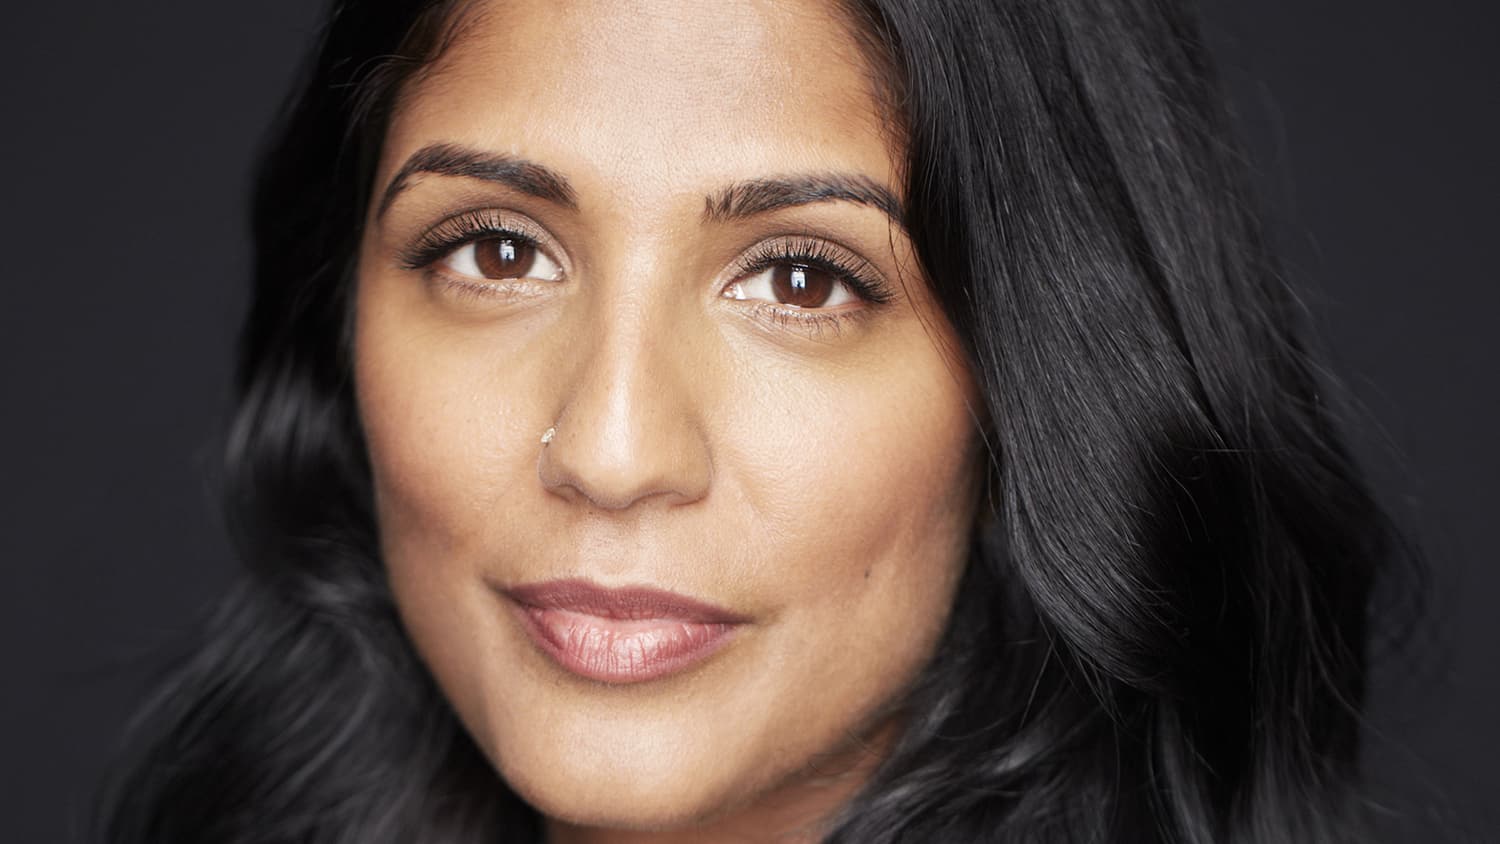 Best-selling author Mira Jacob will speak at Bard College at Simon's Rock on her graphic memoir Good Talk: A Memoir in Conversations.